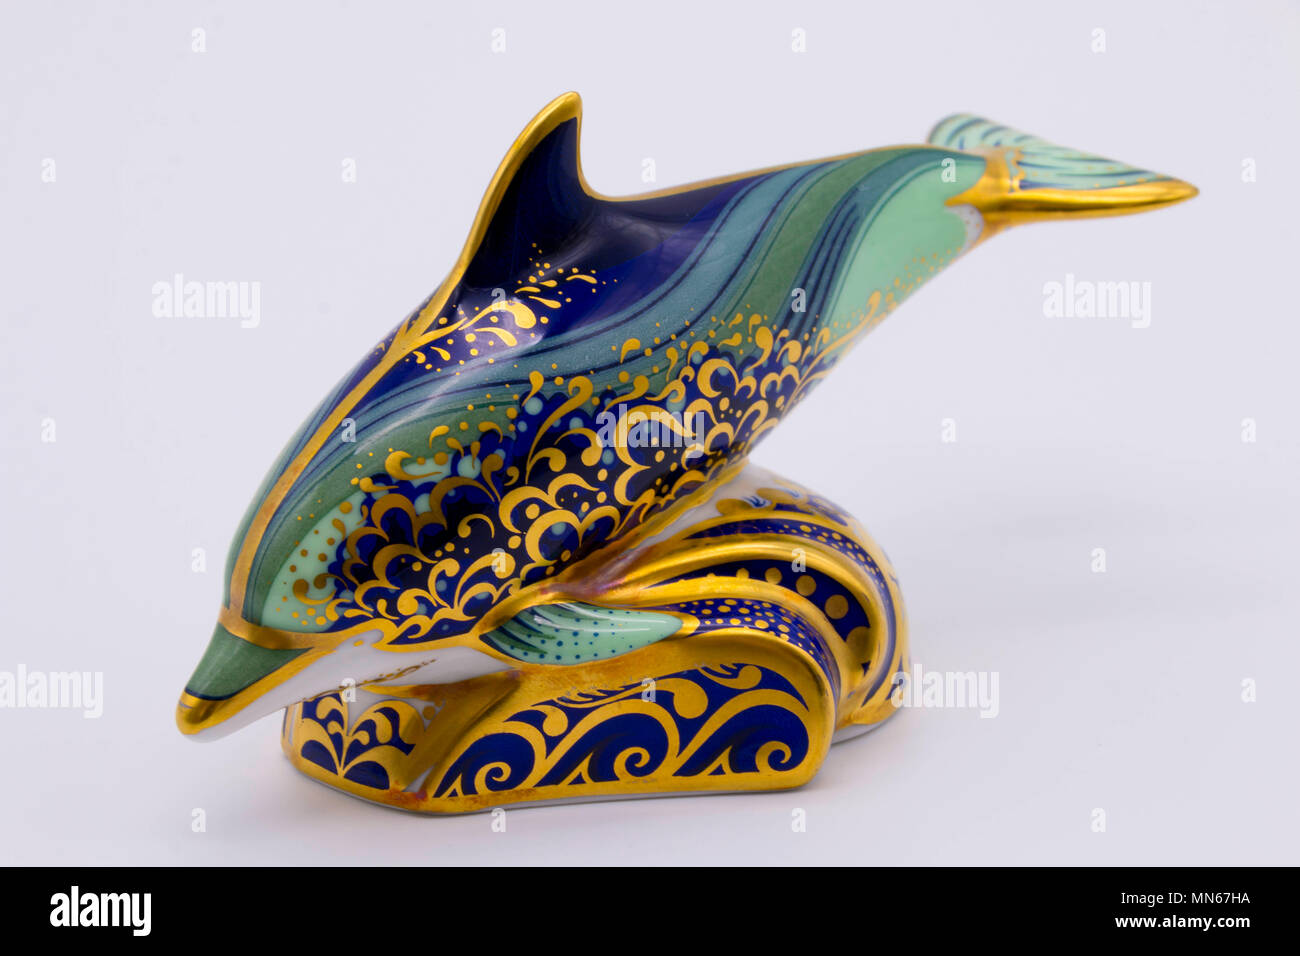 Royal Crown Derby bone china paperweightof a dolphin uk Stock Photo